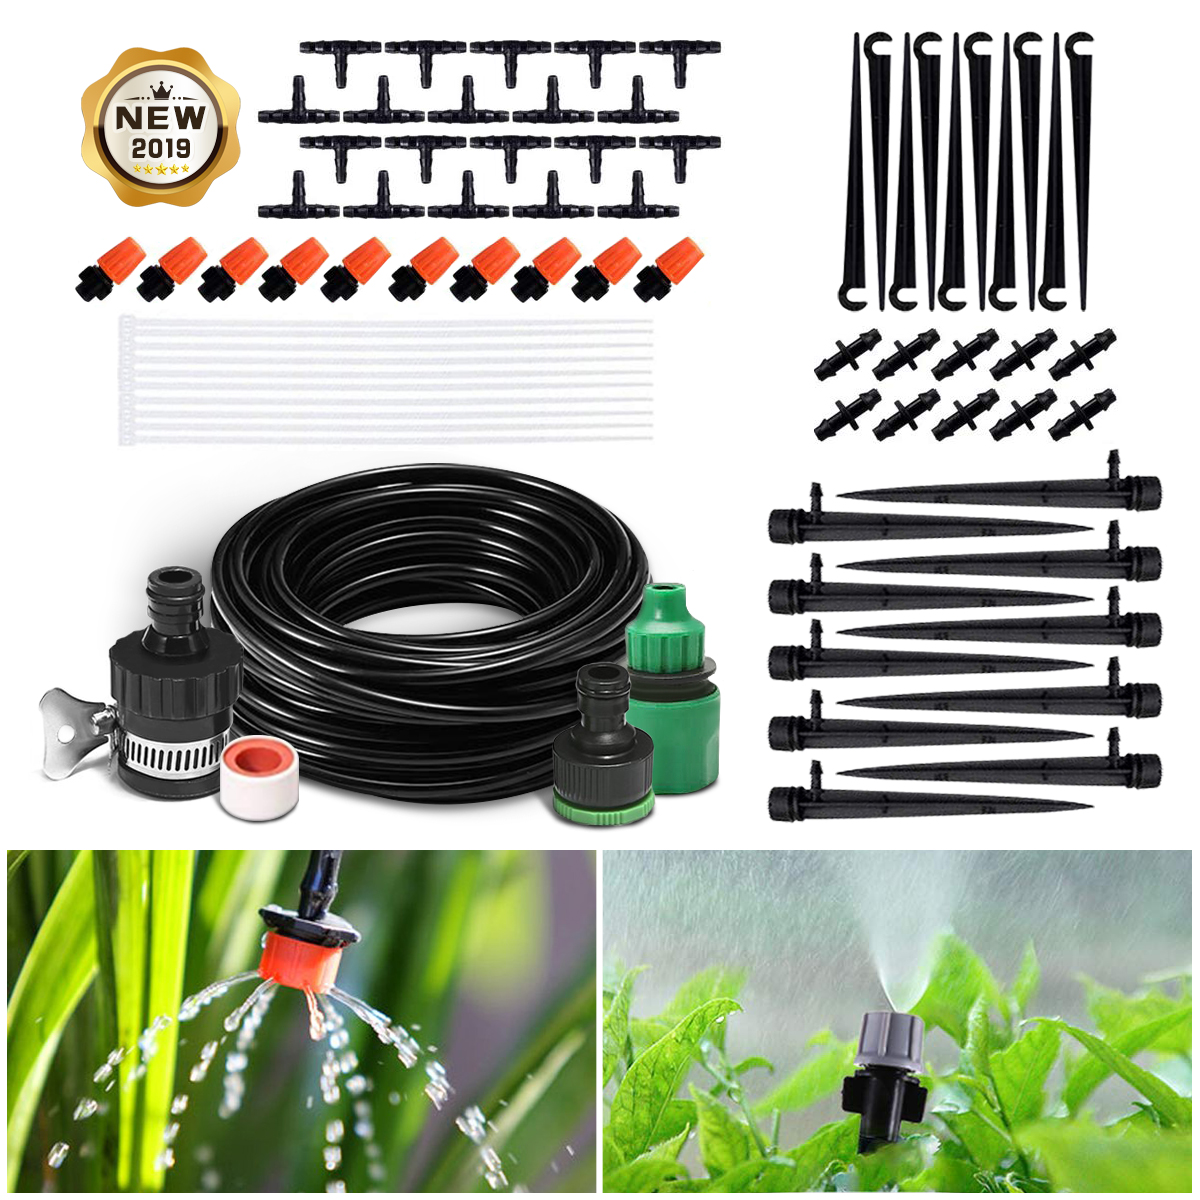 

Automatic Drip Irrigation System DIY Micro Drip Garden Watering Adjustable Plant Water Hose Automatic Kits (15M tubing set)